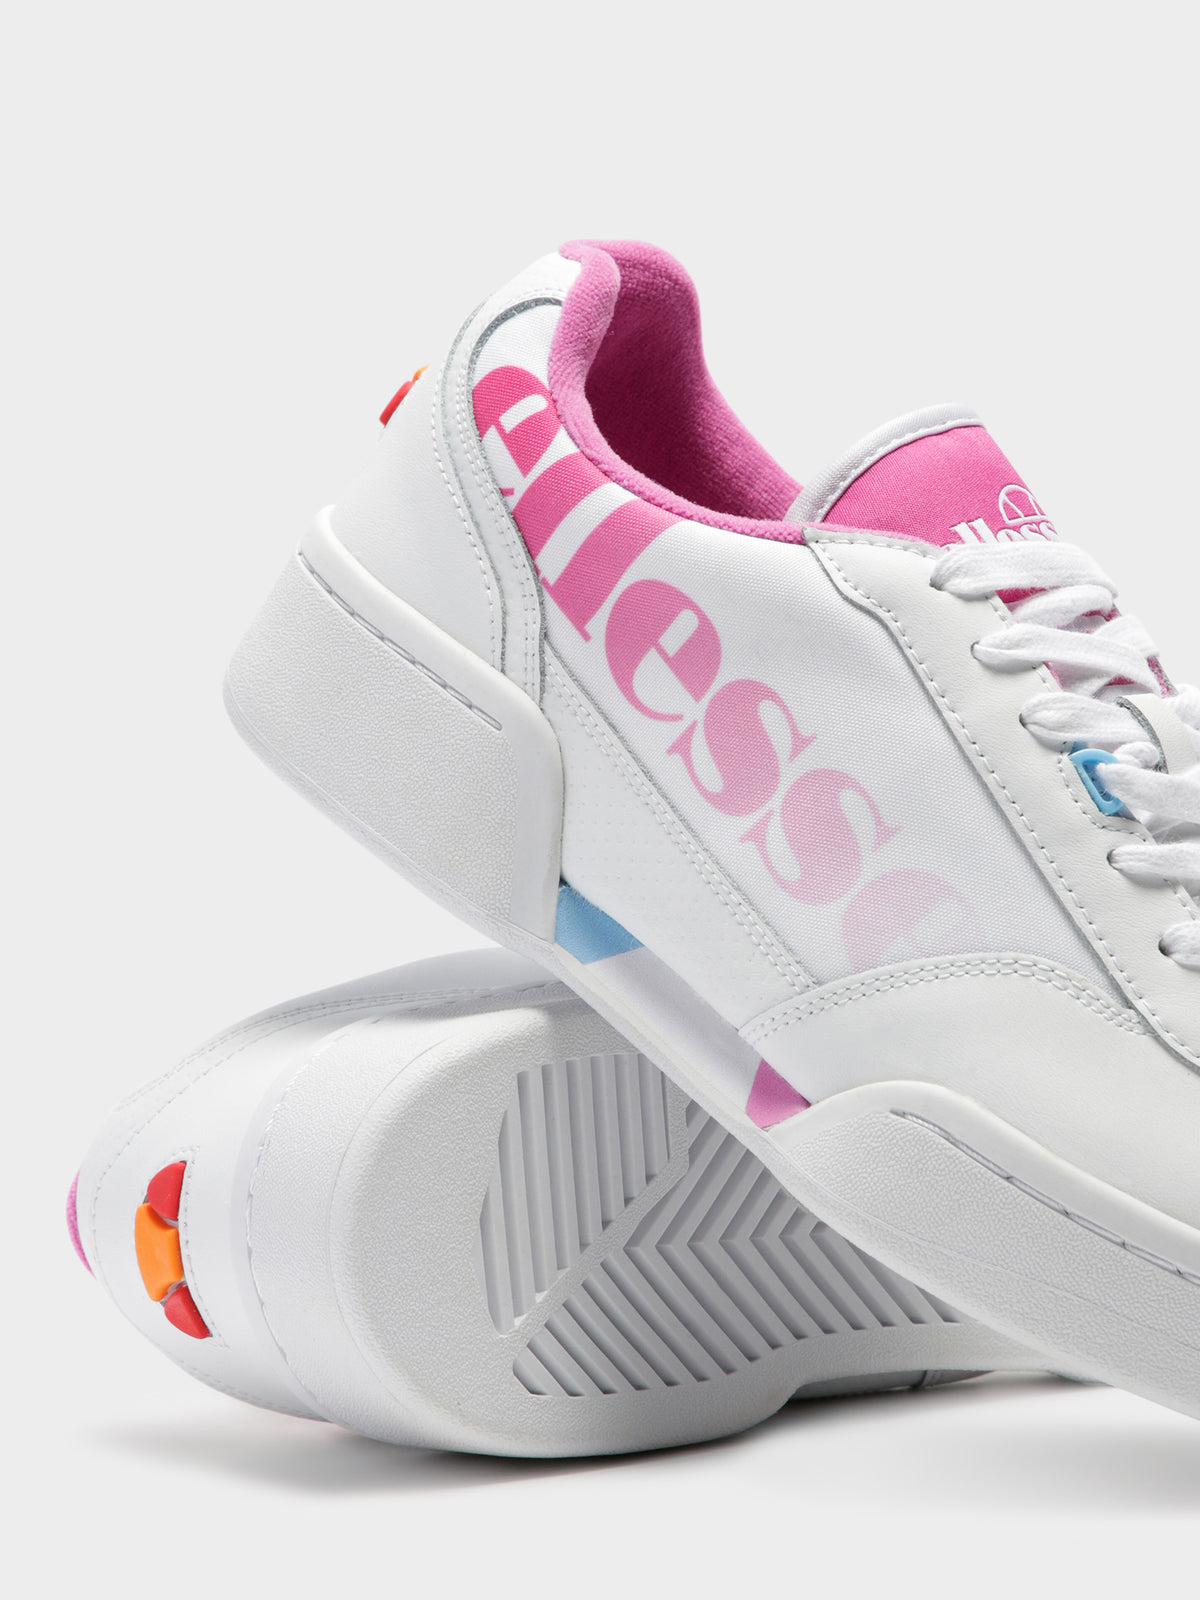 Womens Piacentino Sneakers in White and Pink